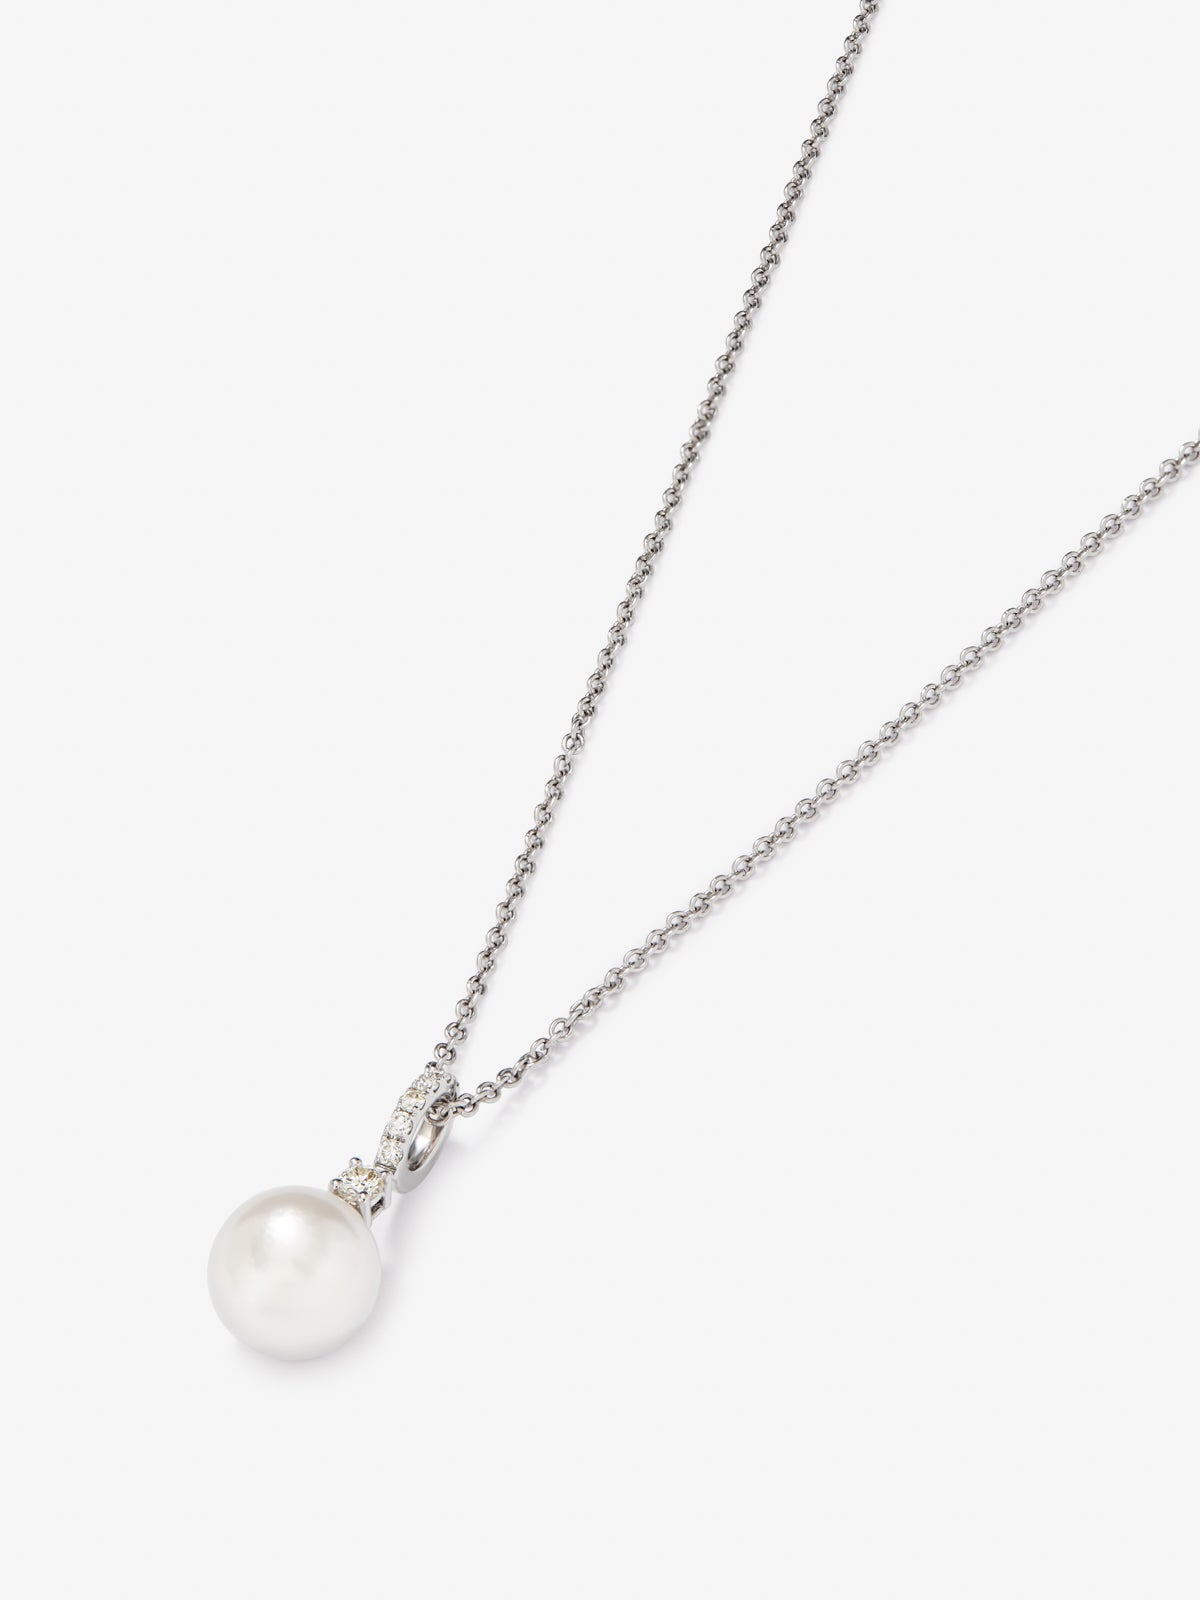 18K white gold pendant with pearl akoya and 0.1 cts diamonds